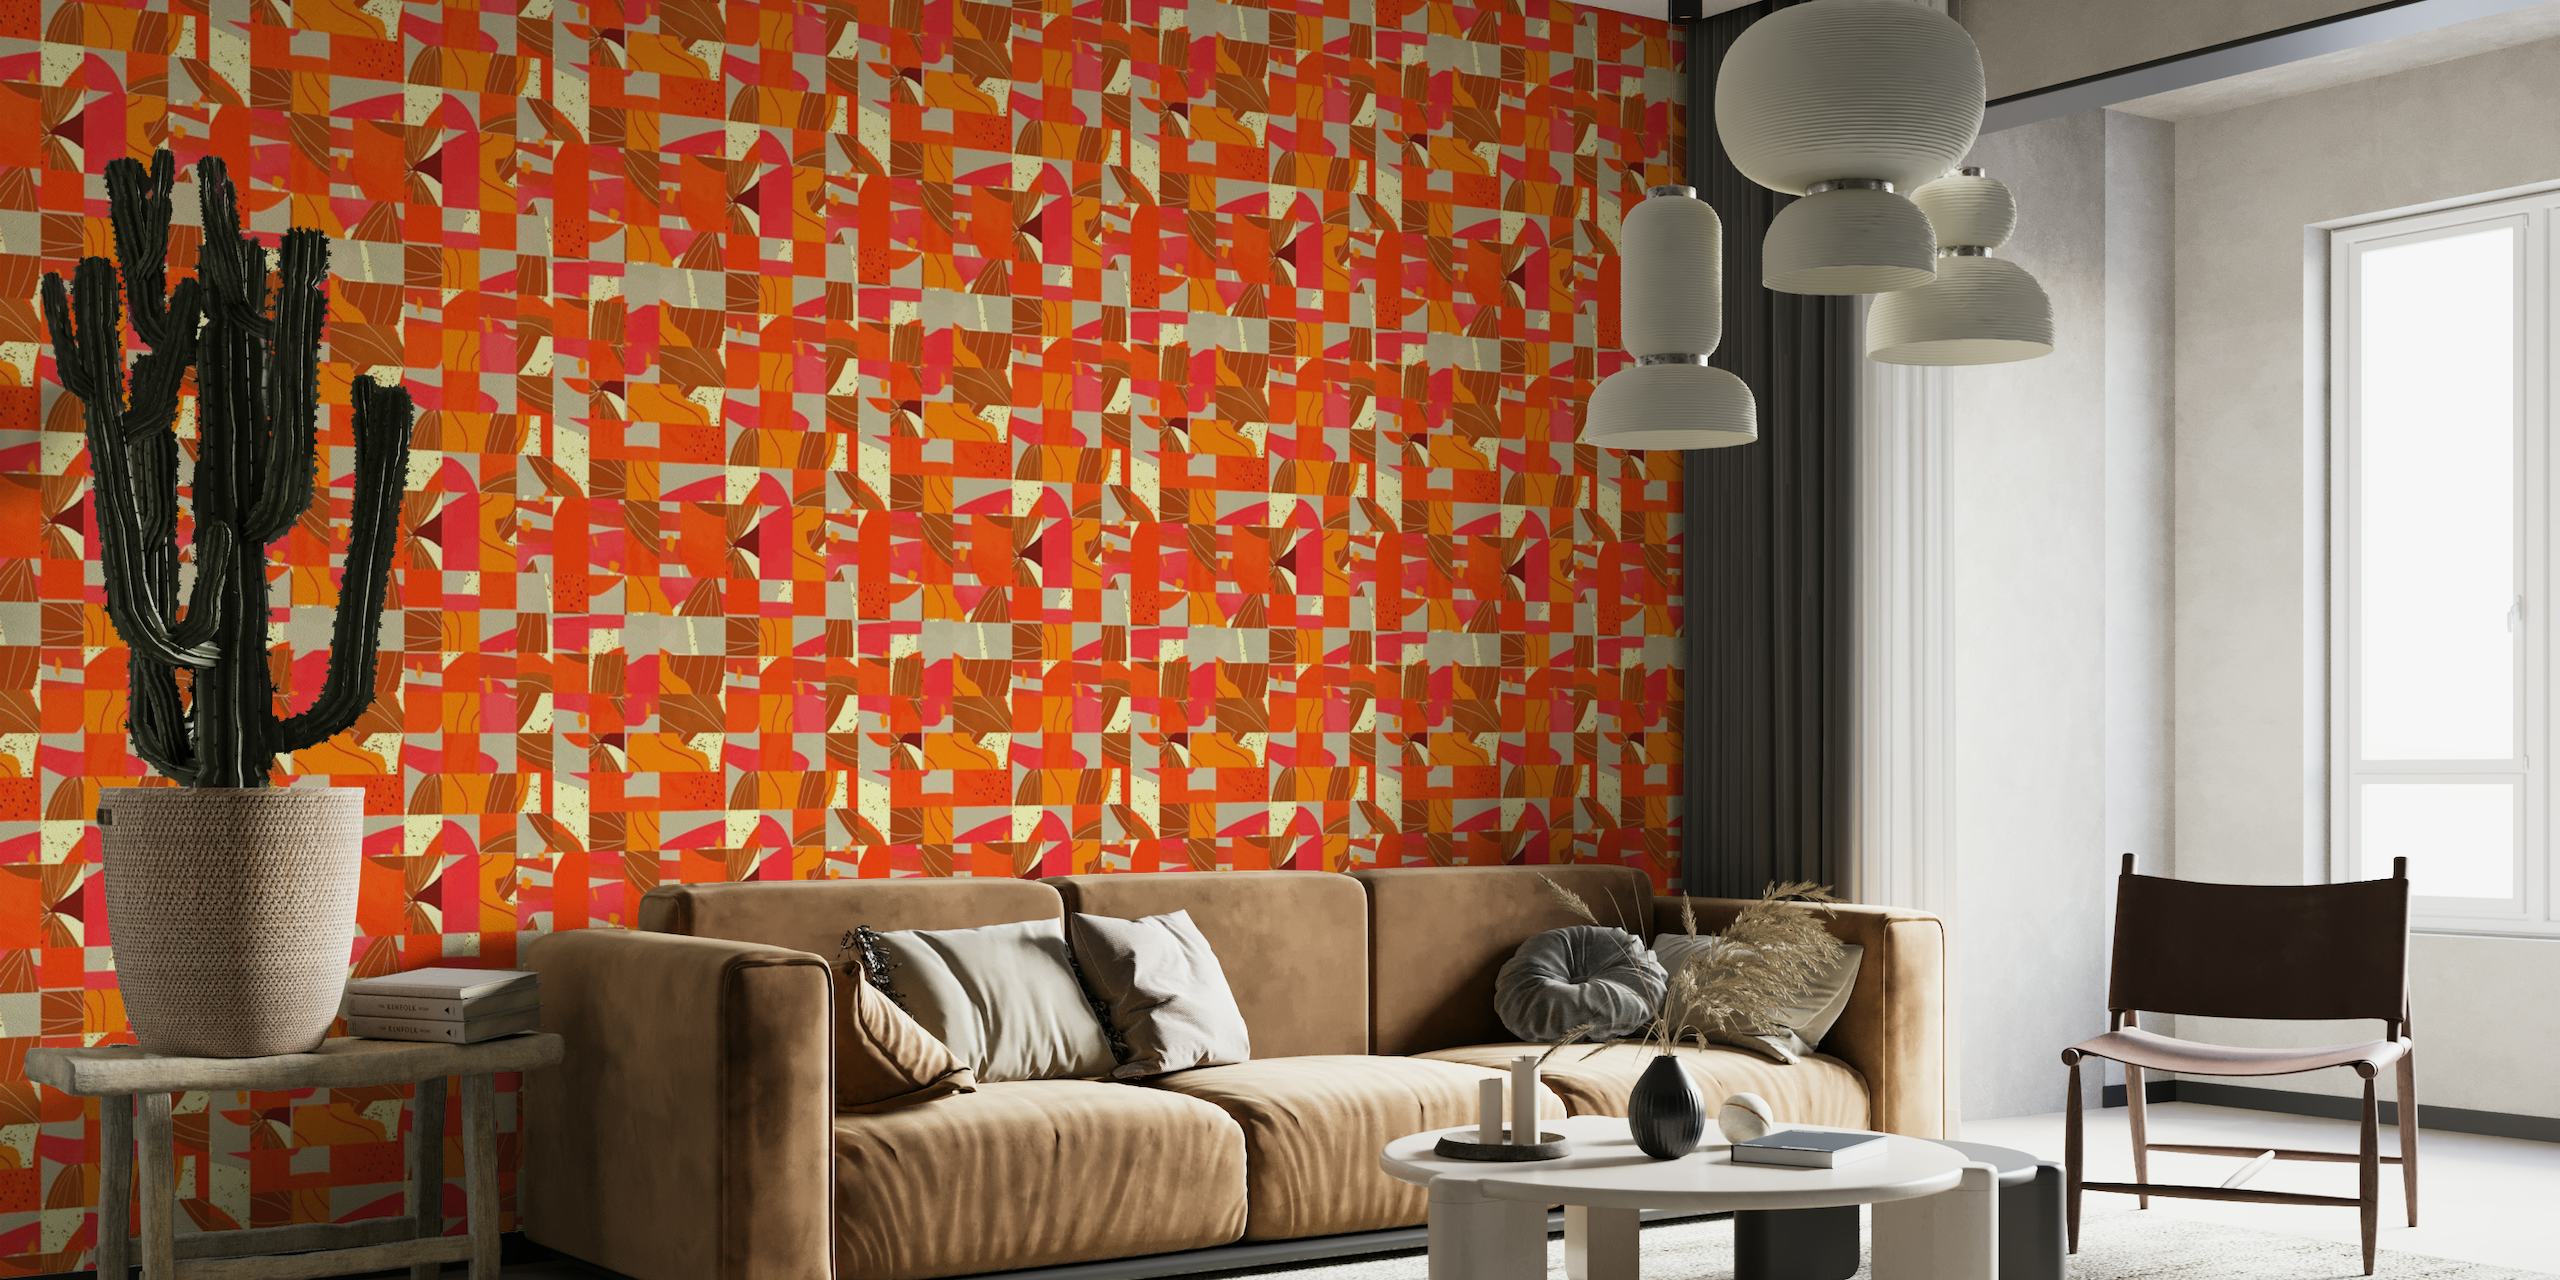 Kubik Red wall mural with geometric shapes in red, orange, and beige